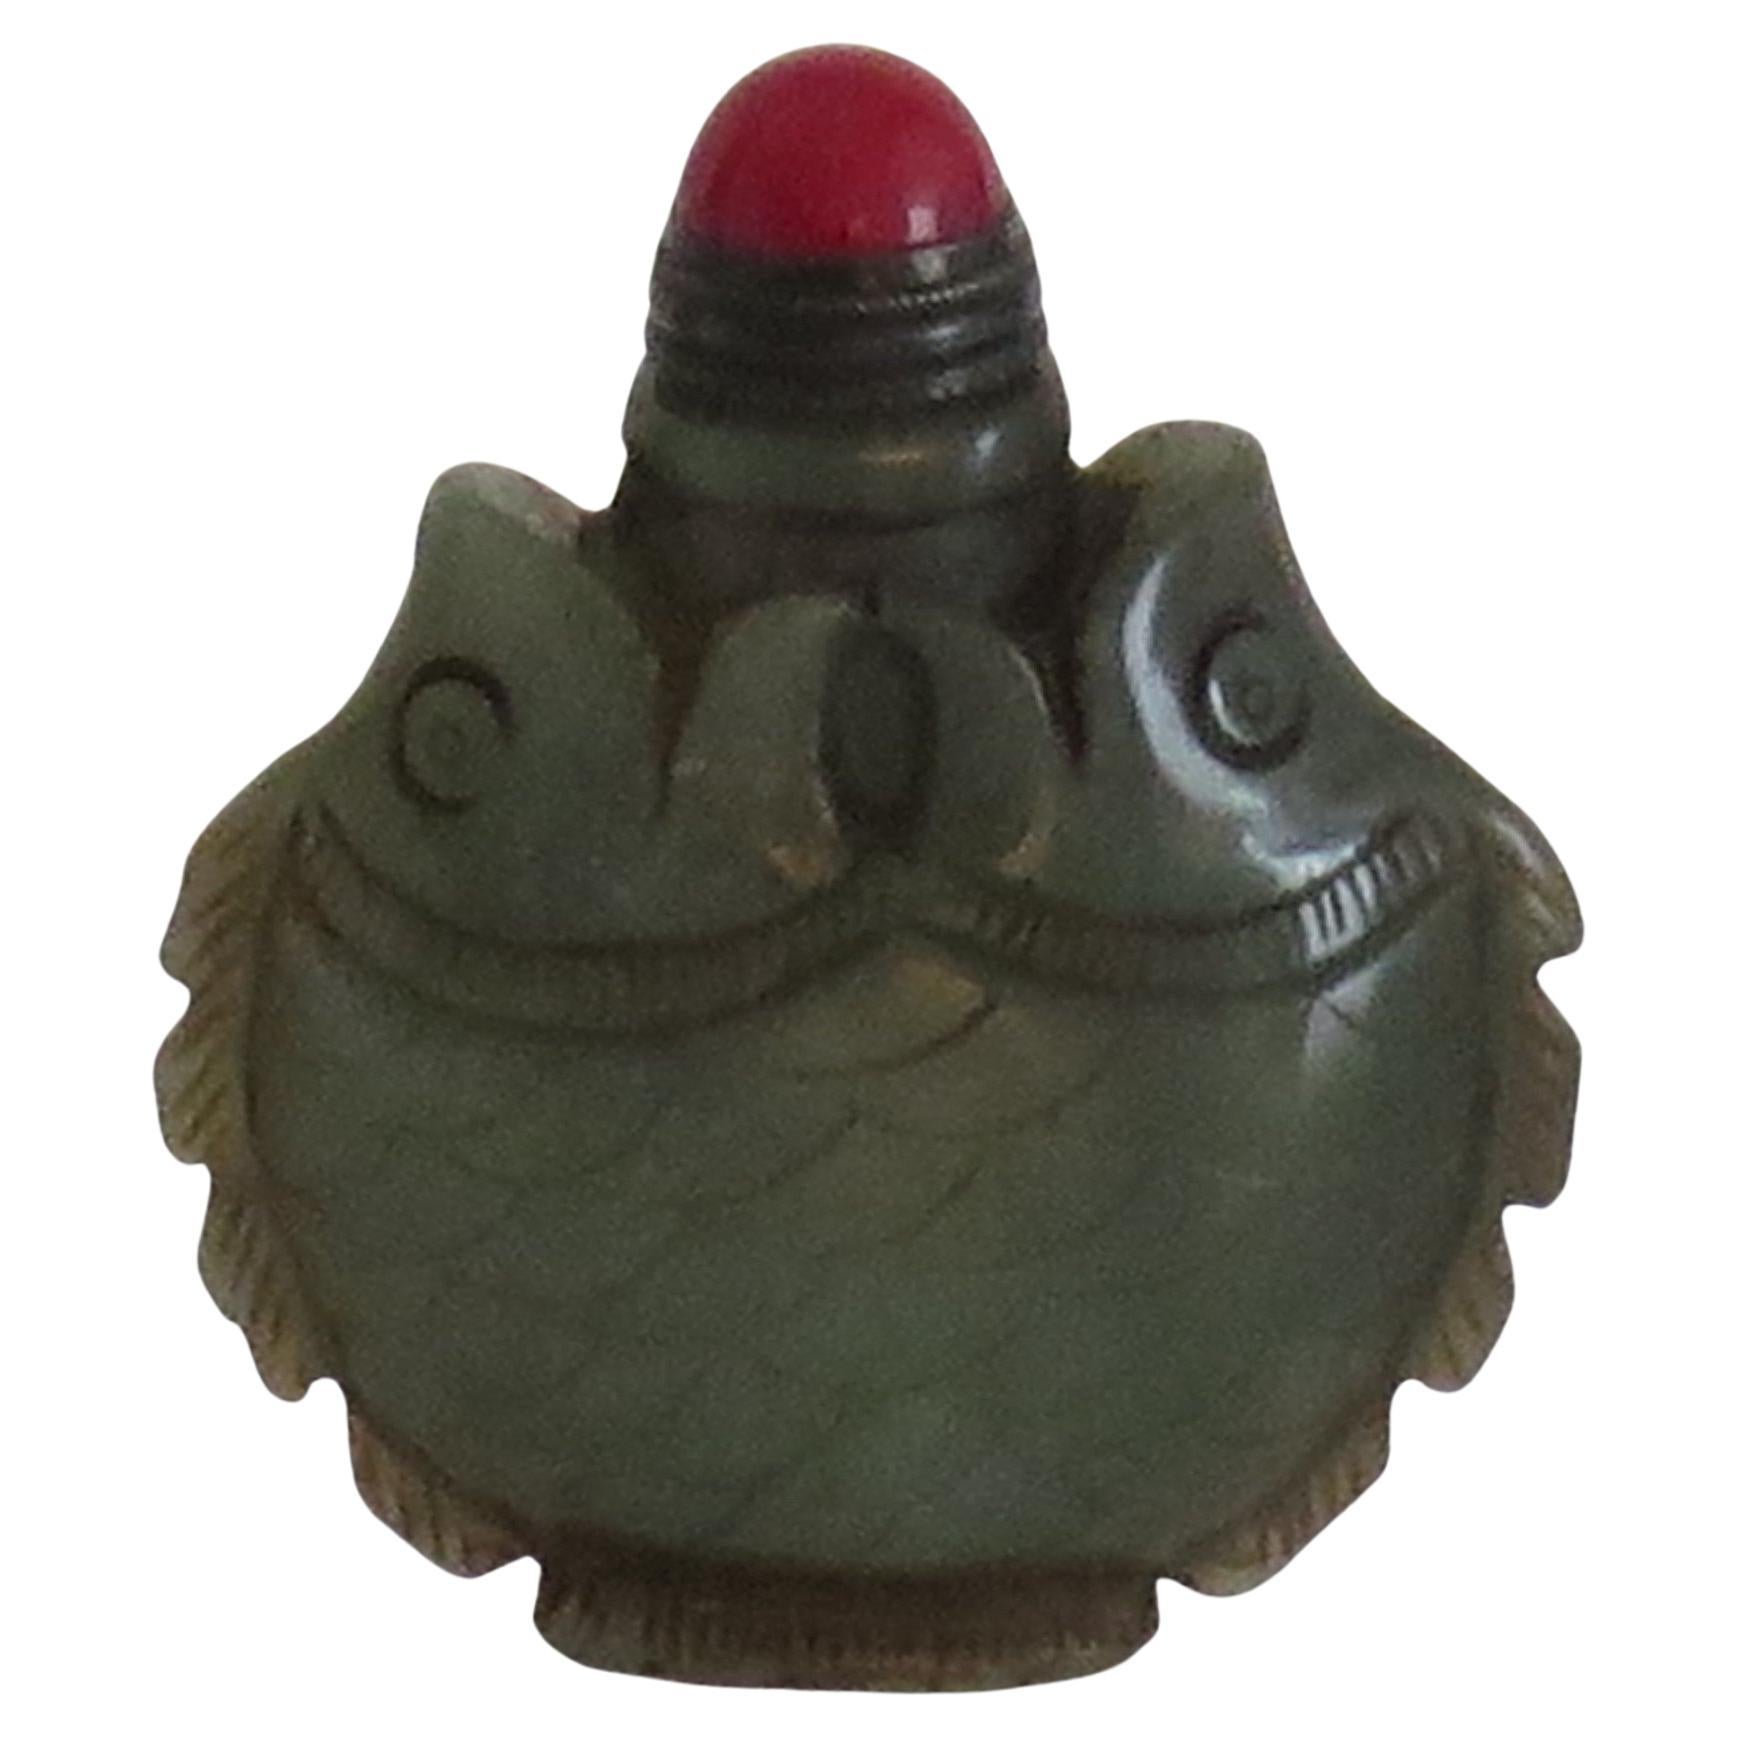 Chinese Snuff Bottle Hand Carved Natural Serpentine Stone Spoon Top, circa 1920s